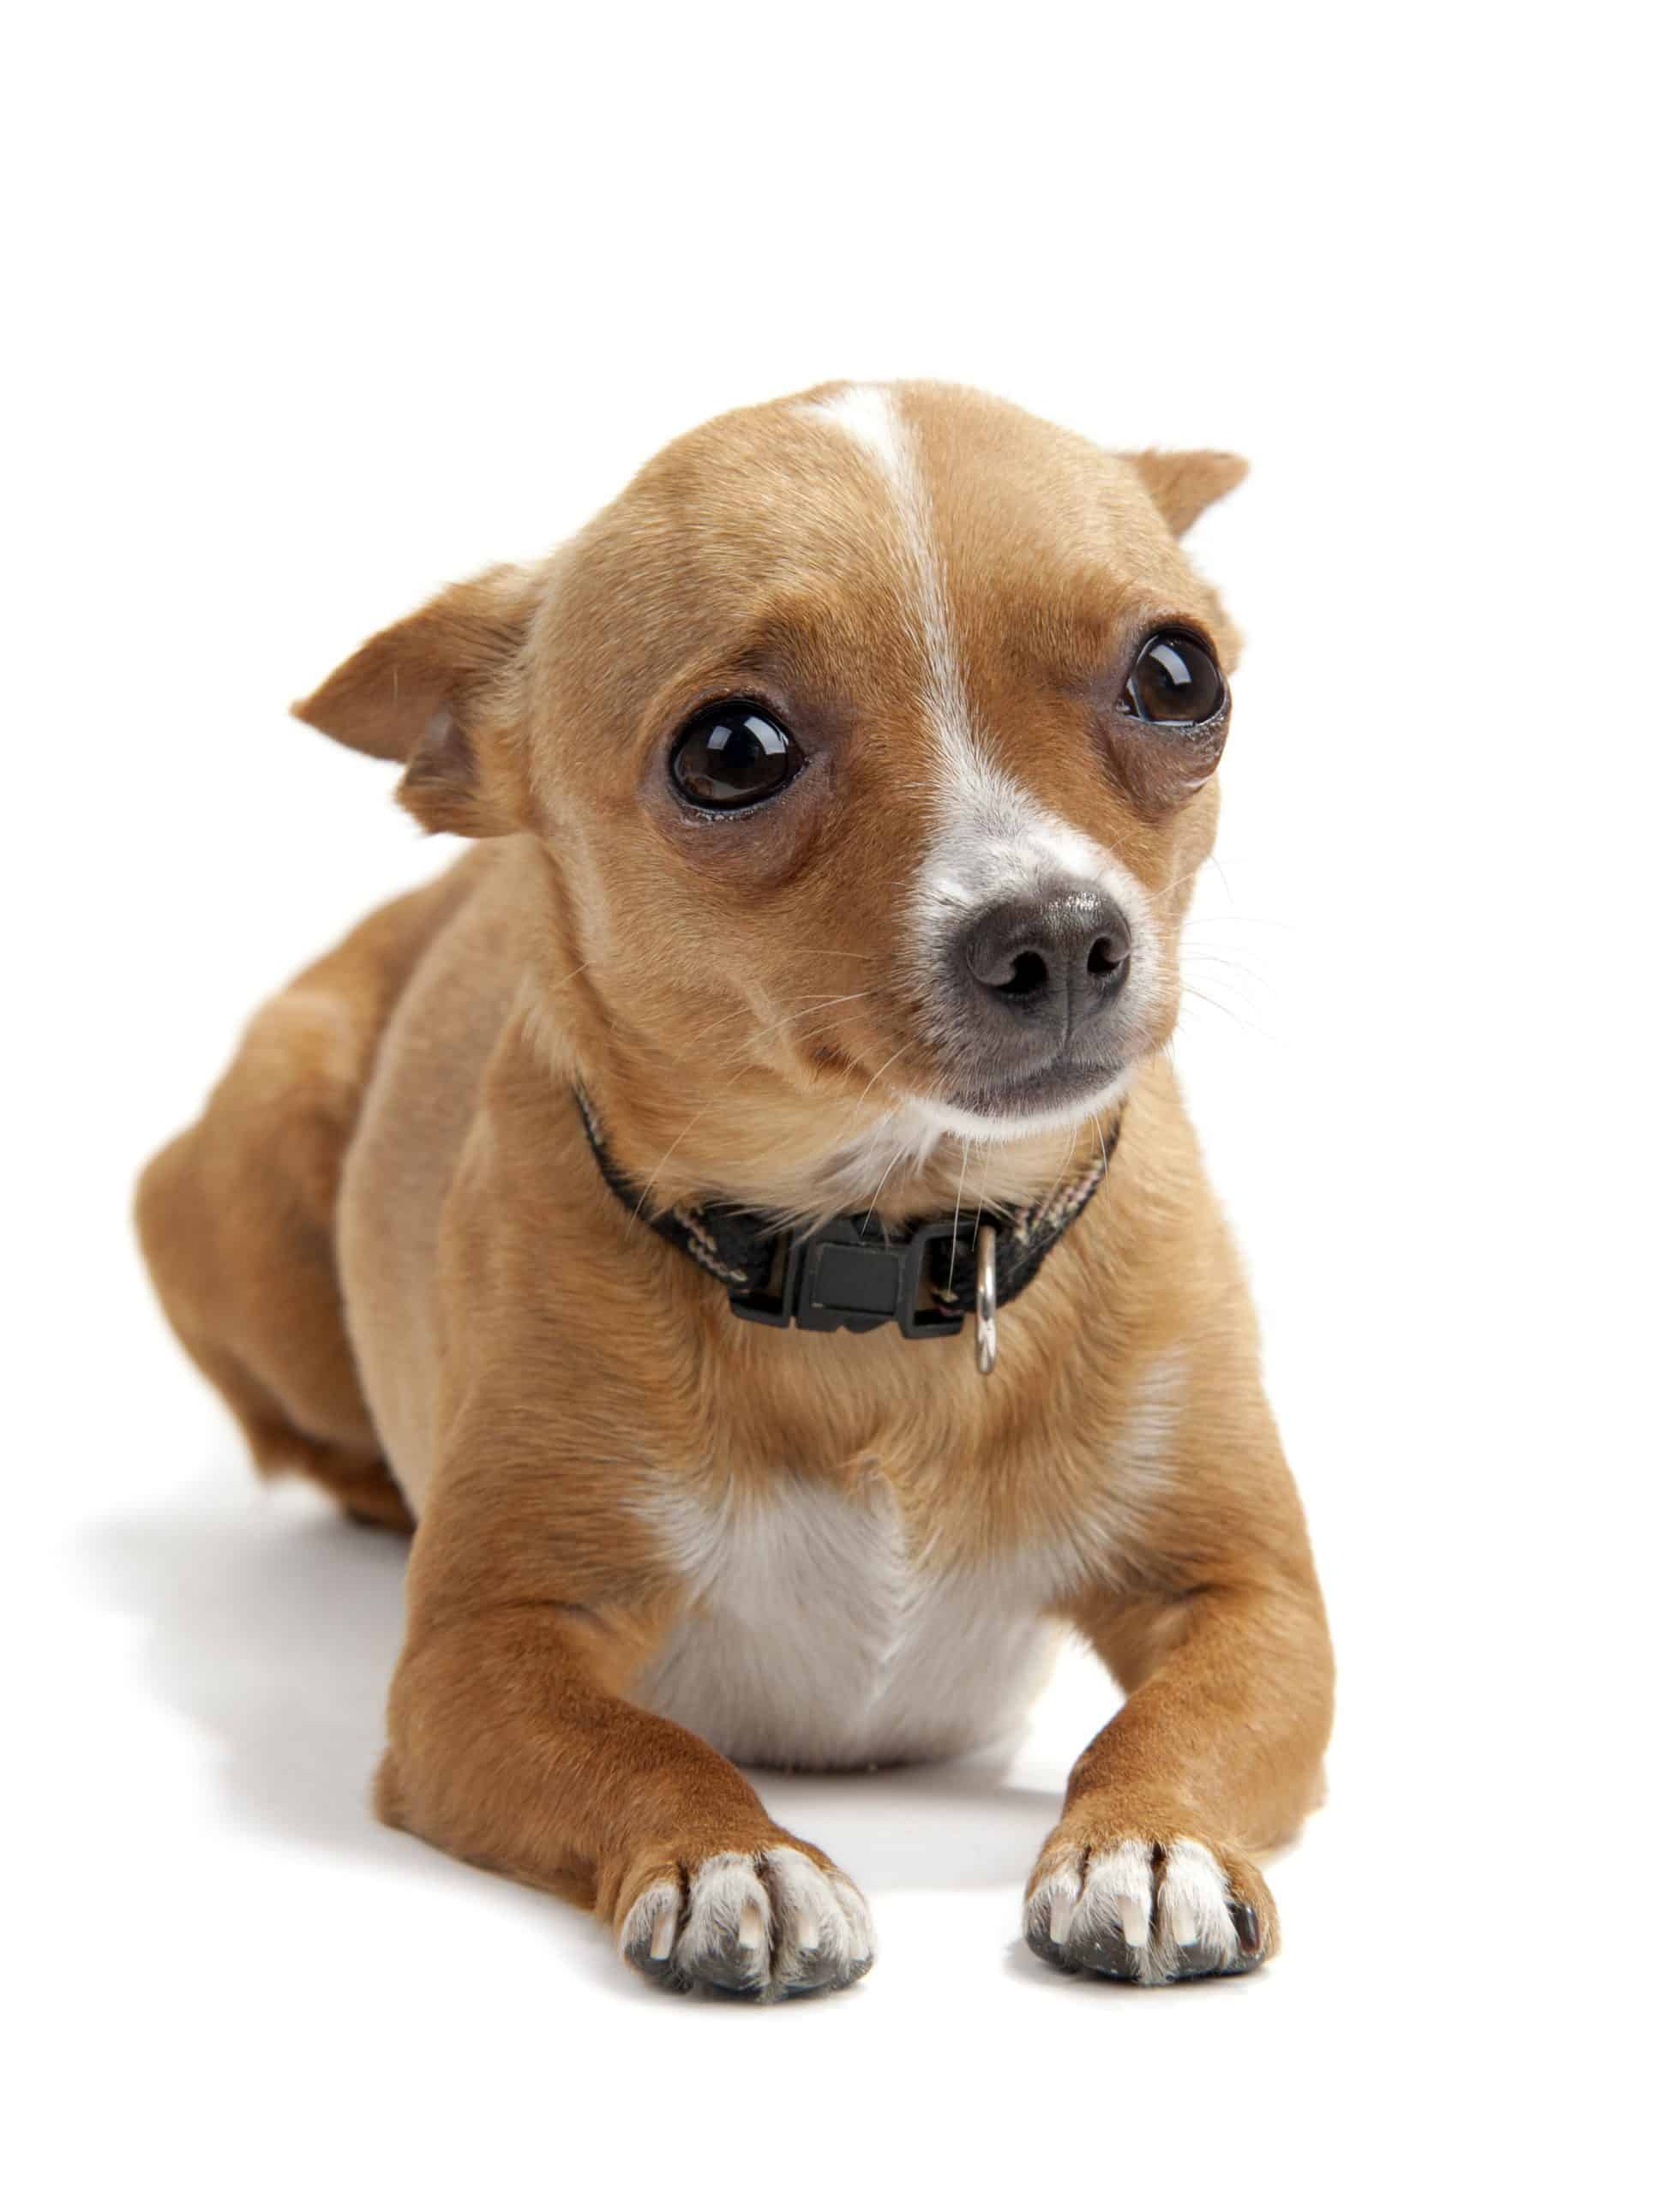 dealing with fearfulness in a chihuahua